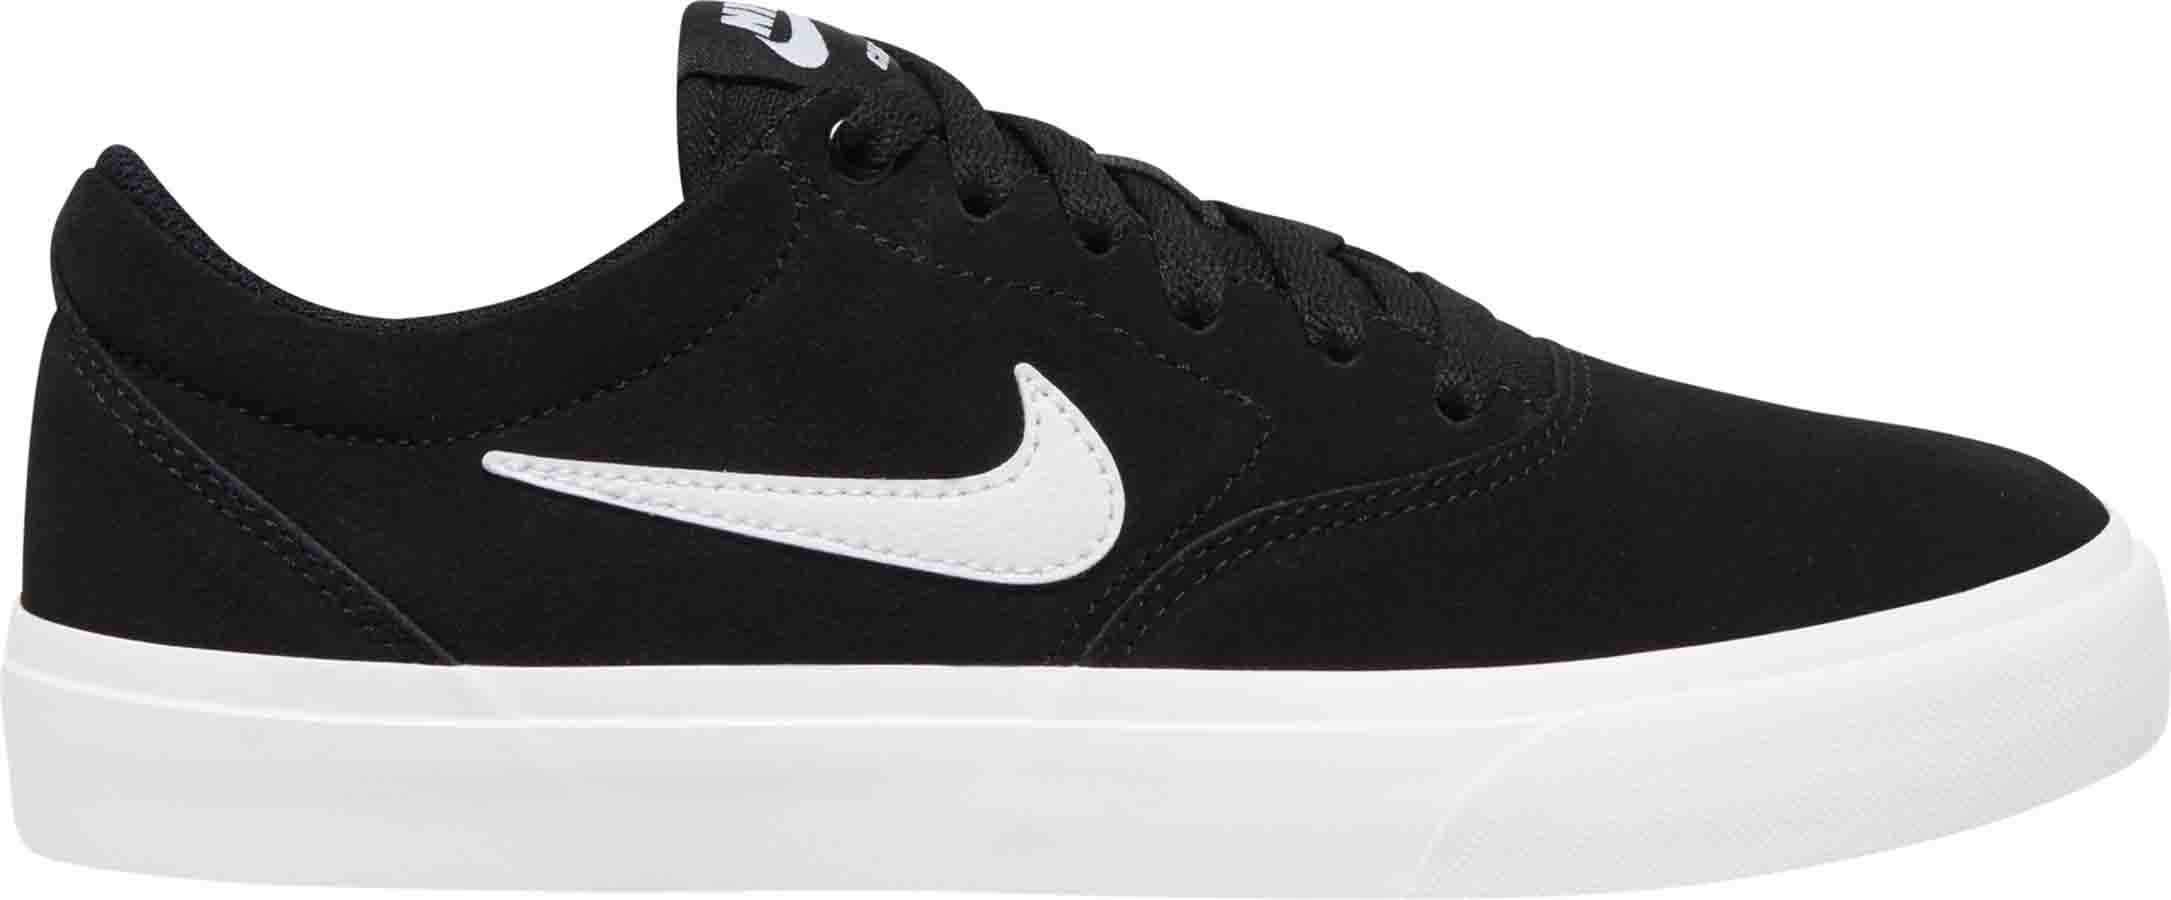 Nike SB Charge Suede Womens Skate Shoes